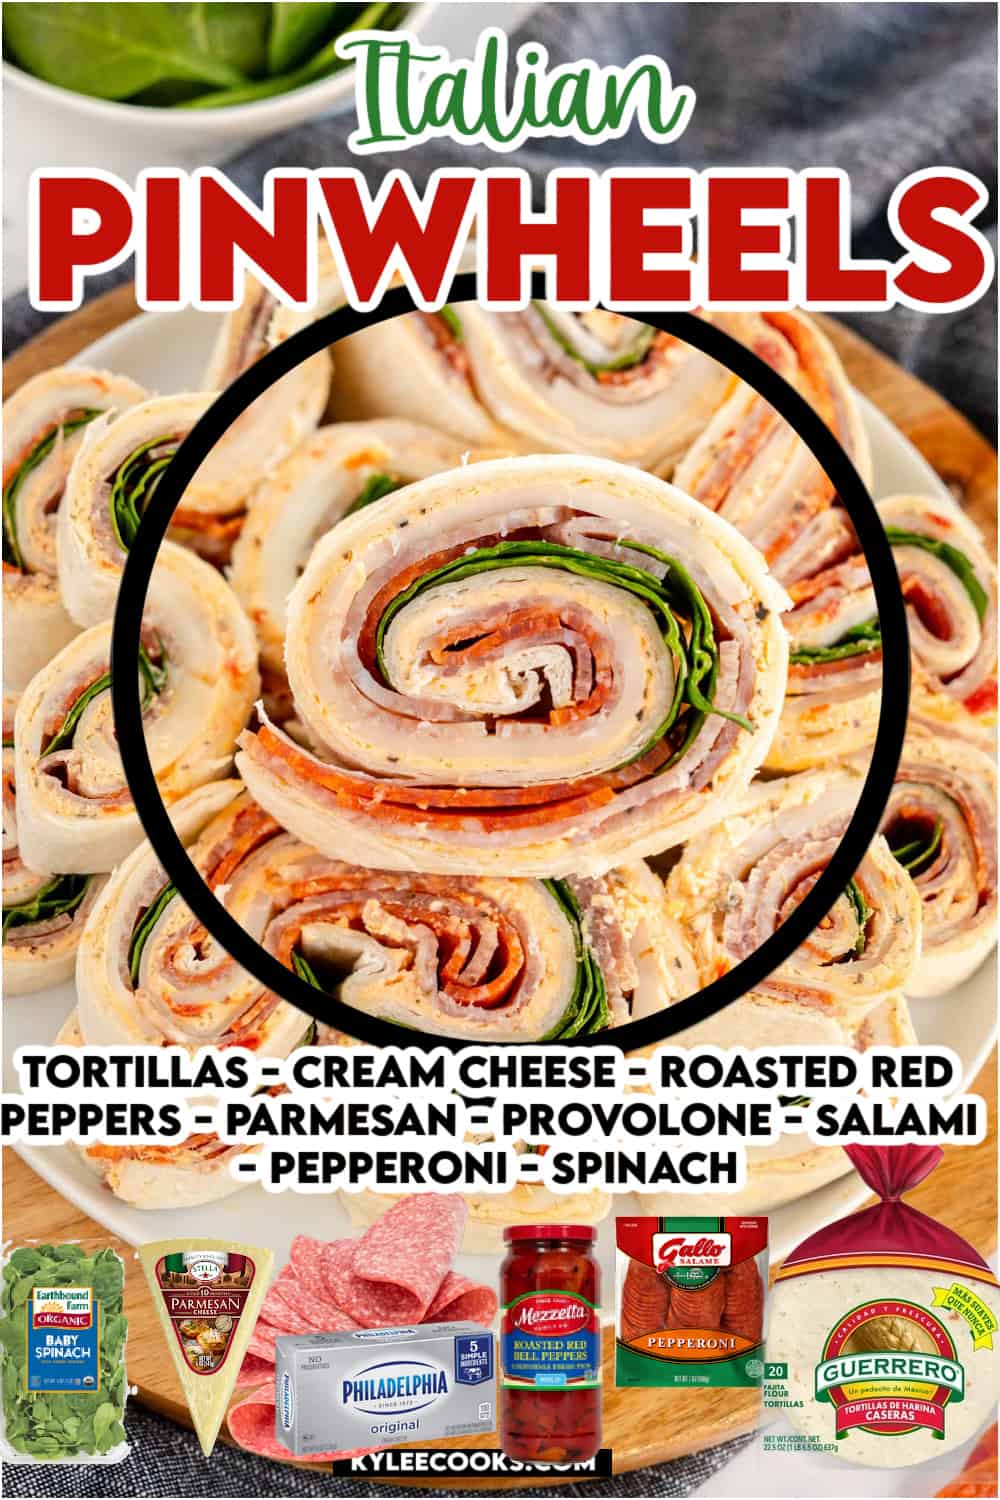 sliced italian pinwheel with recipe name and ingredients overlaid in text.